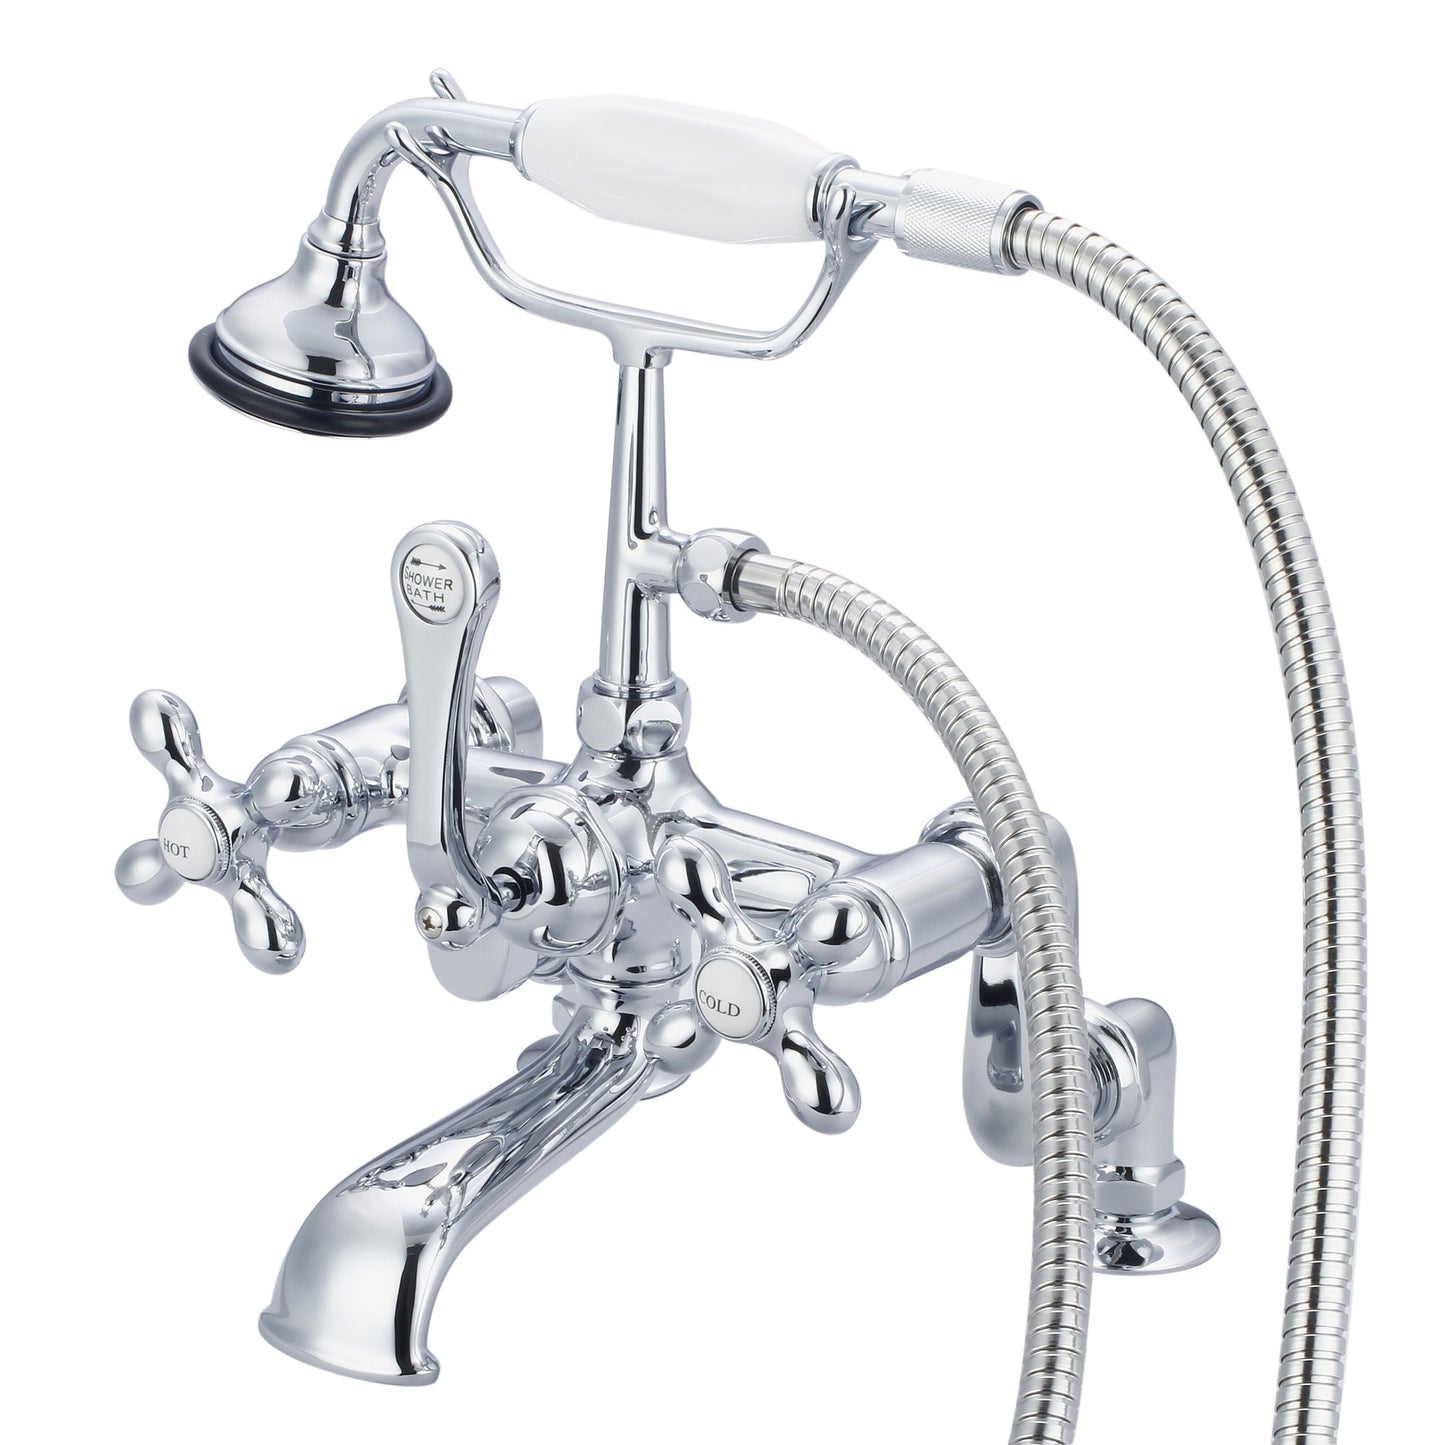 Water Creation Vintage Classic Adjustable Center Deck Mount Tub F6-0008 7" Silver Solid Brass Faucet With Handheld Shower And Metal Lever Handles, Hot And Cold Labels Included